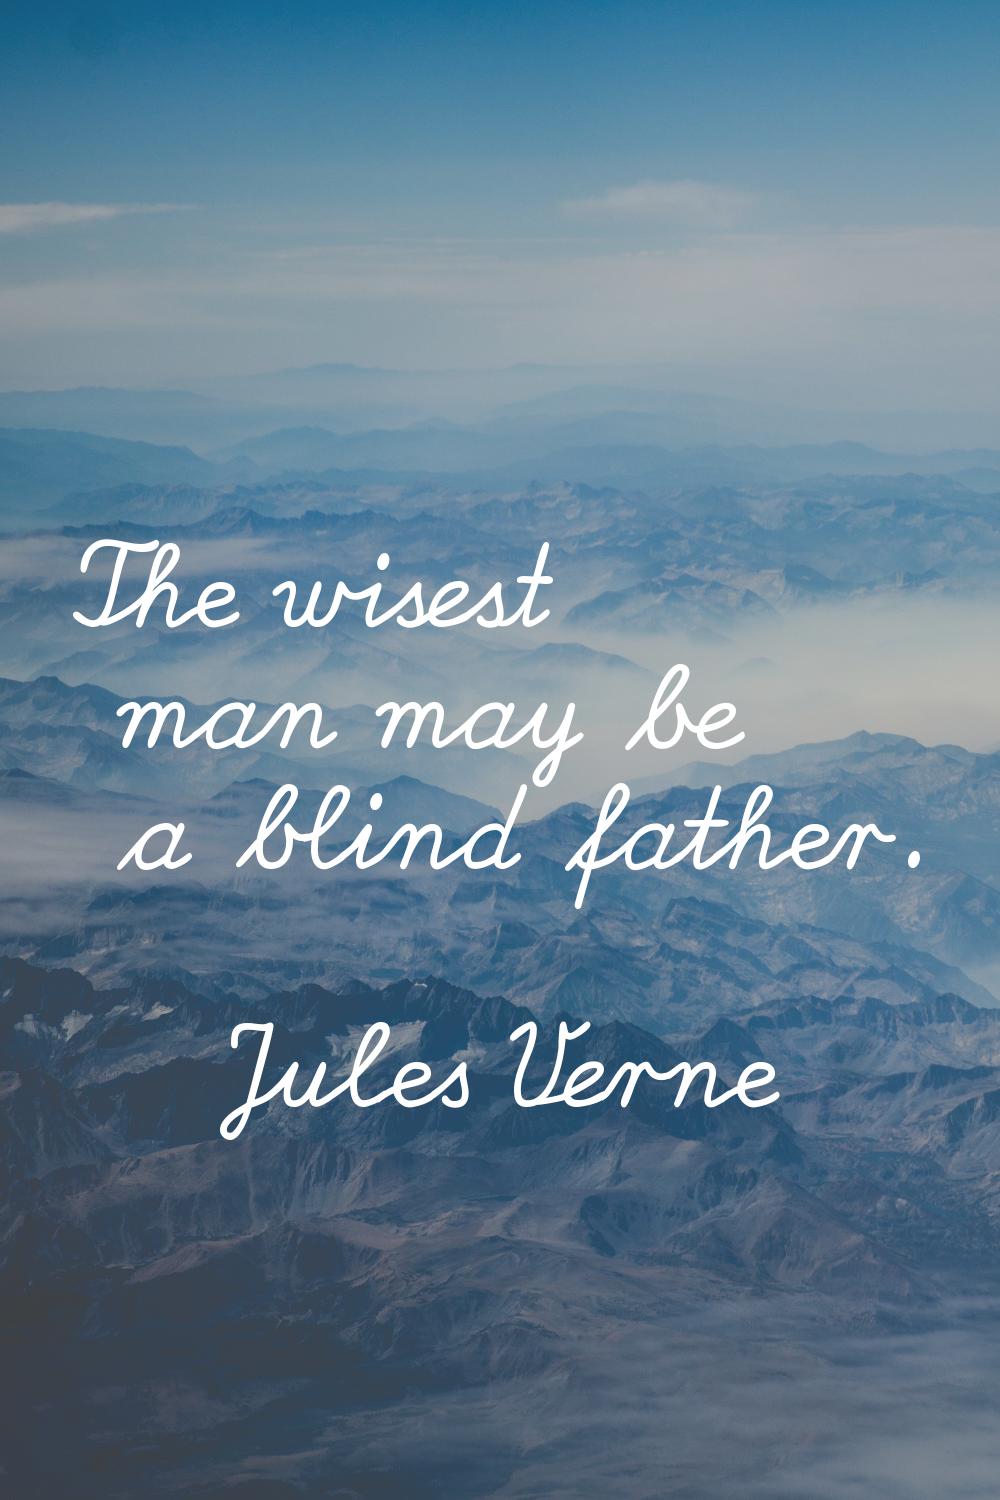 The wisest man may be a blind father.